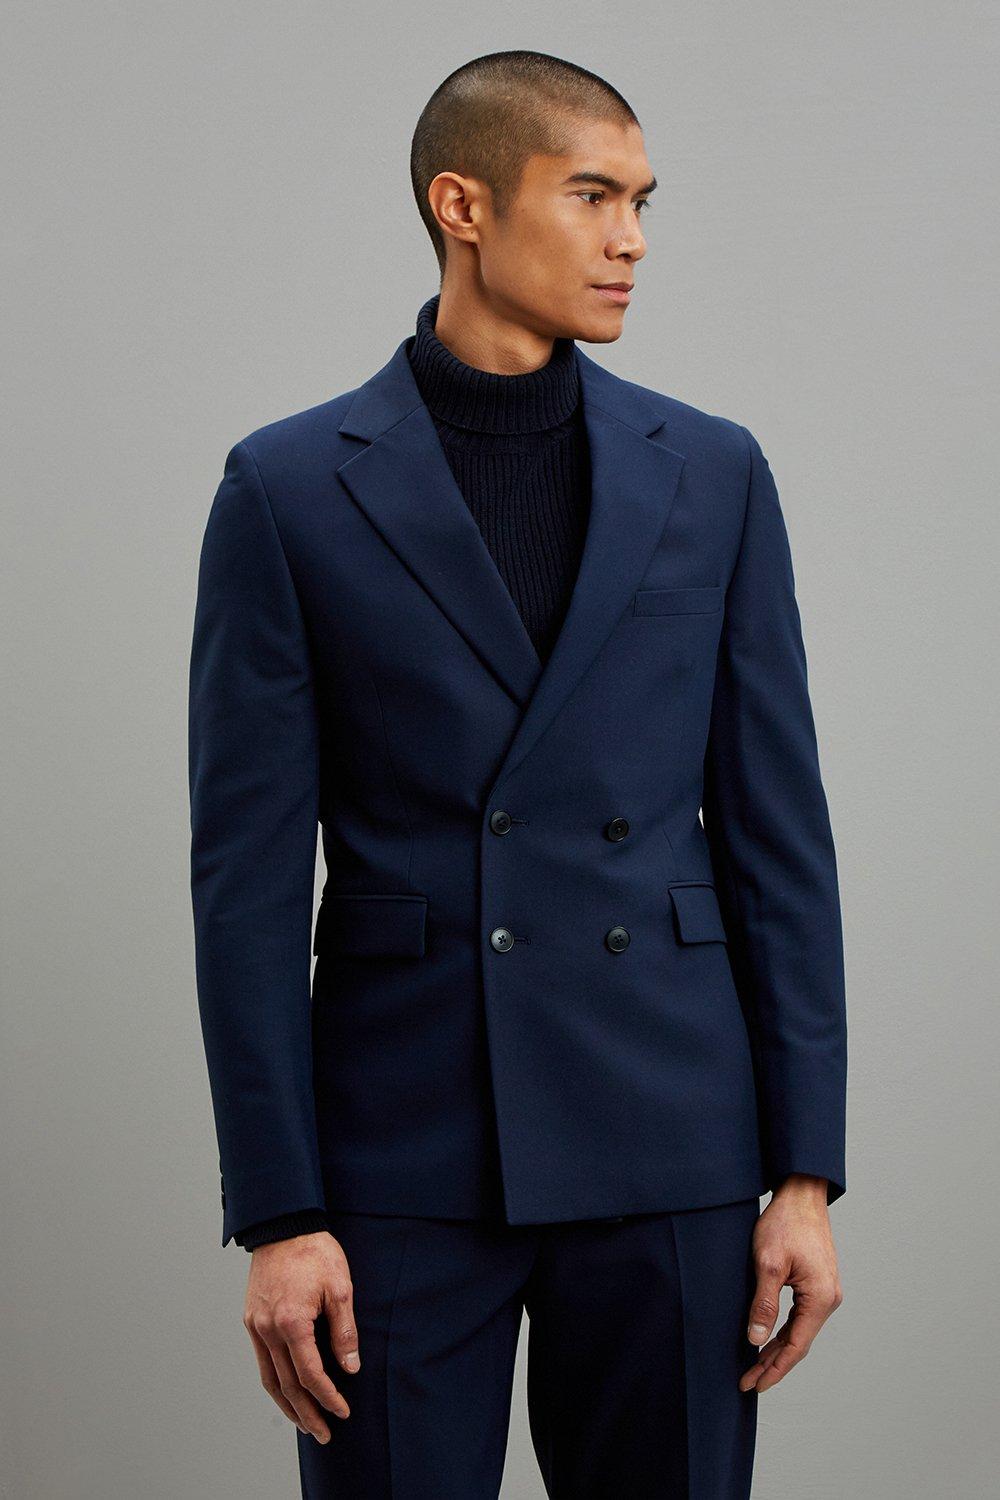 Mens Super Skinny Fit Navy Double Breasted Suit Jacket